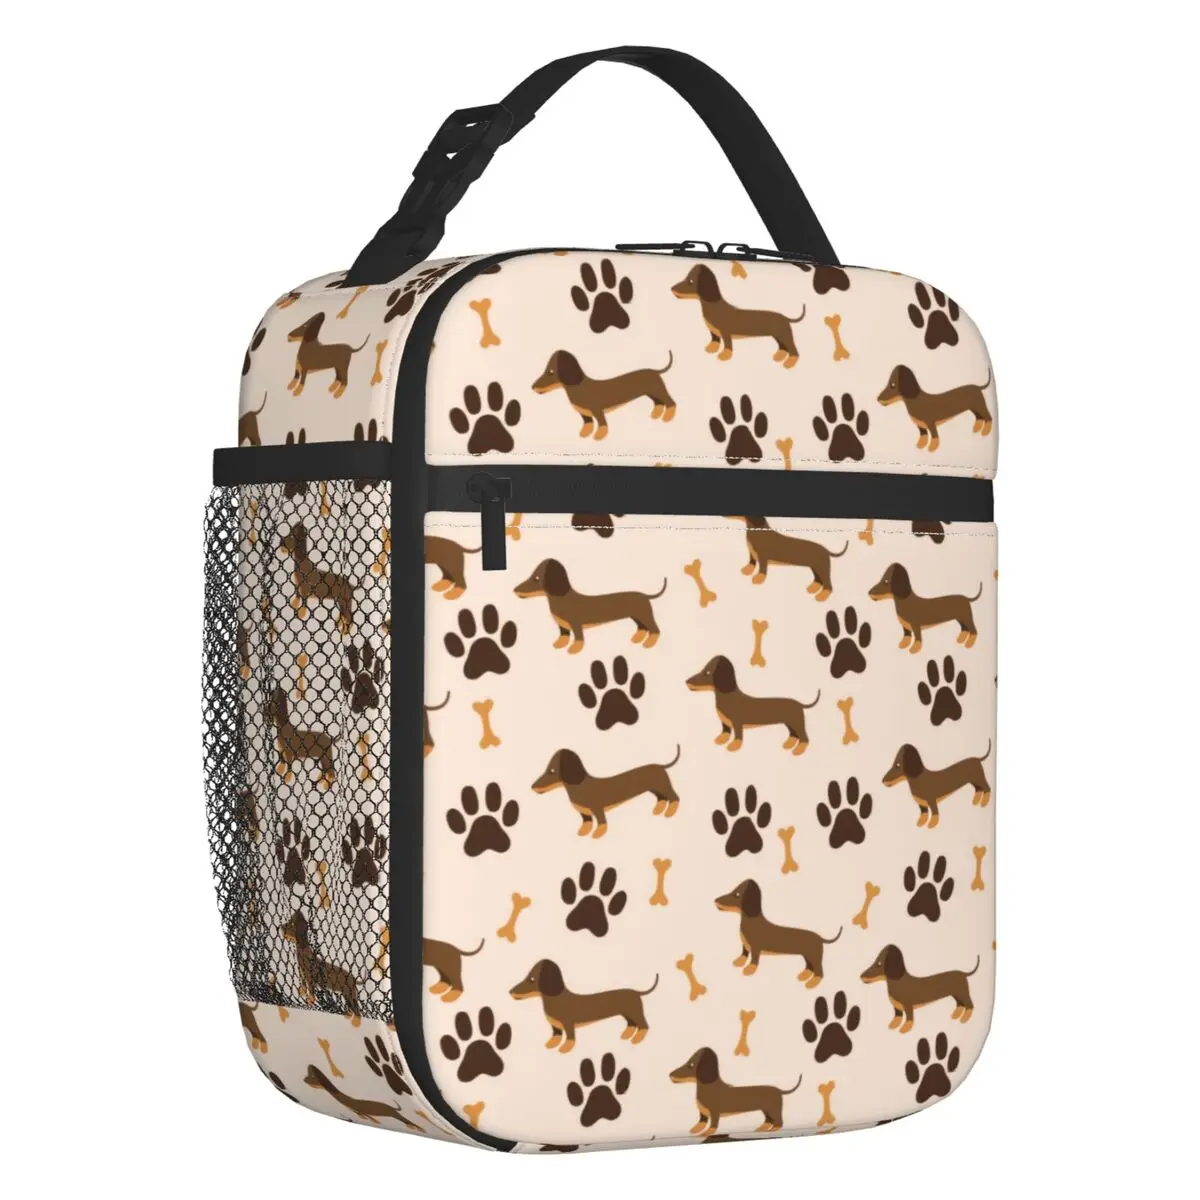 Dachshund Sausage Dog Insulated Lunch Bag for Women Portable Animal Puppy Lovers Cooler Thermal Lunch Tote Office Work School